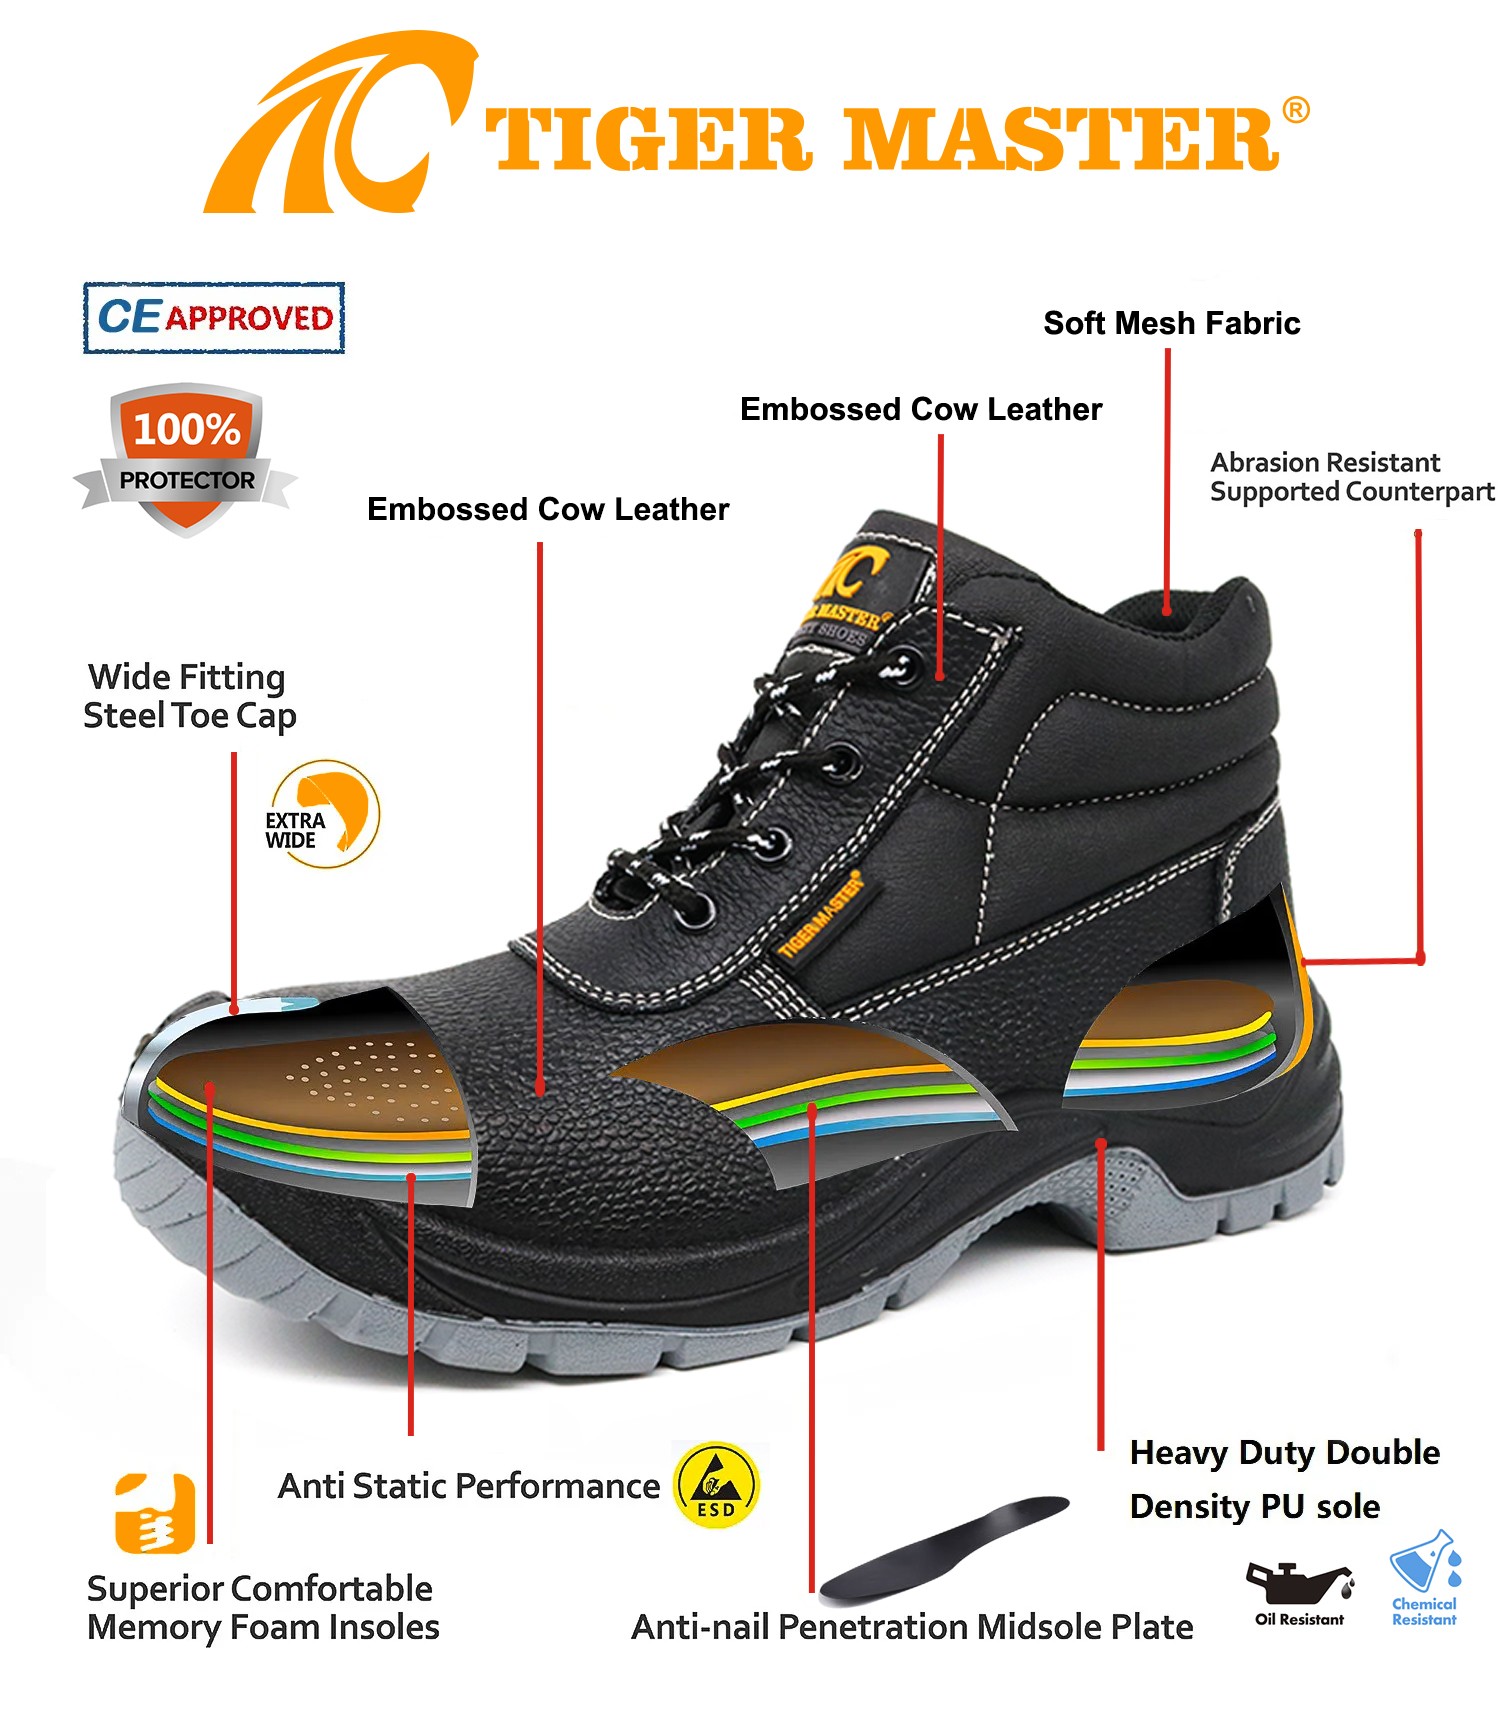 CE Approved Steel Toe Anti Puncture S3 Industrial Safety Shoes Men